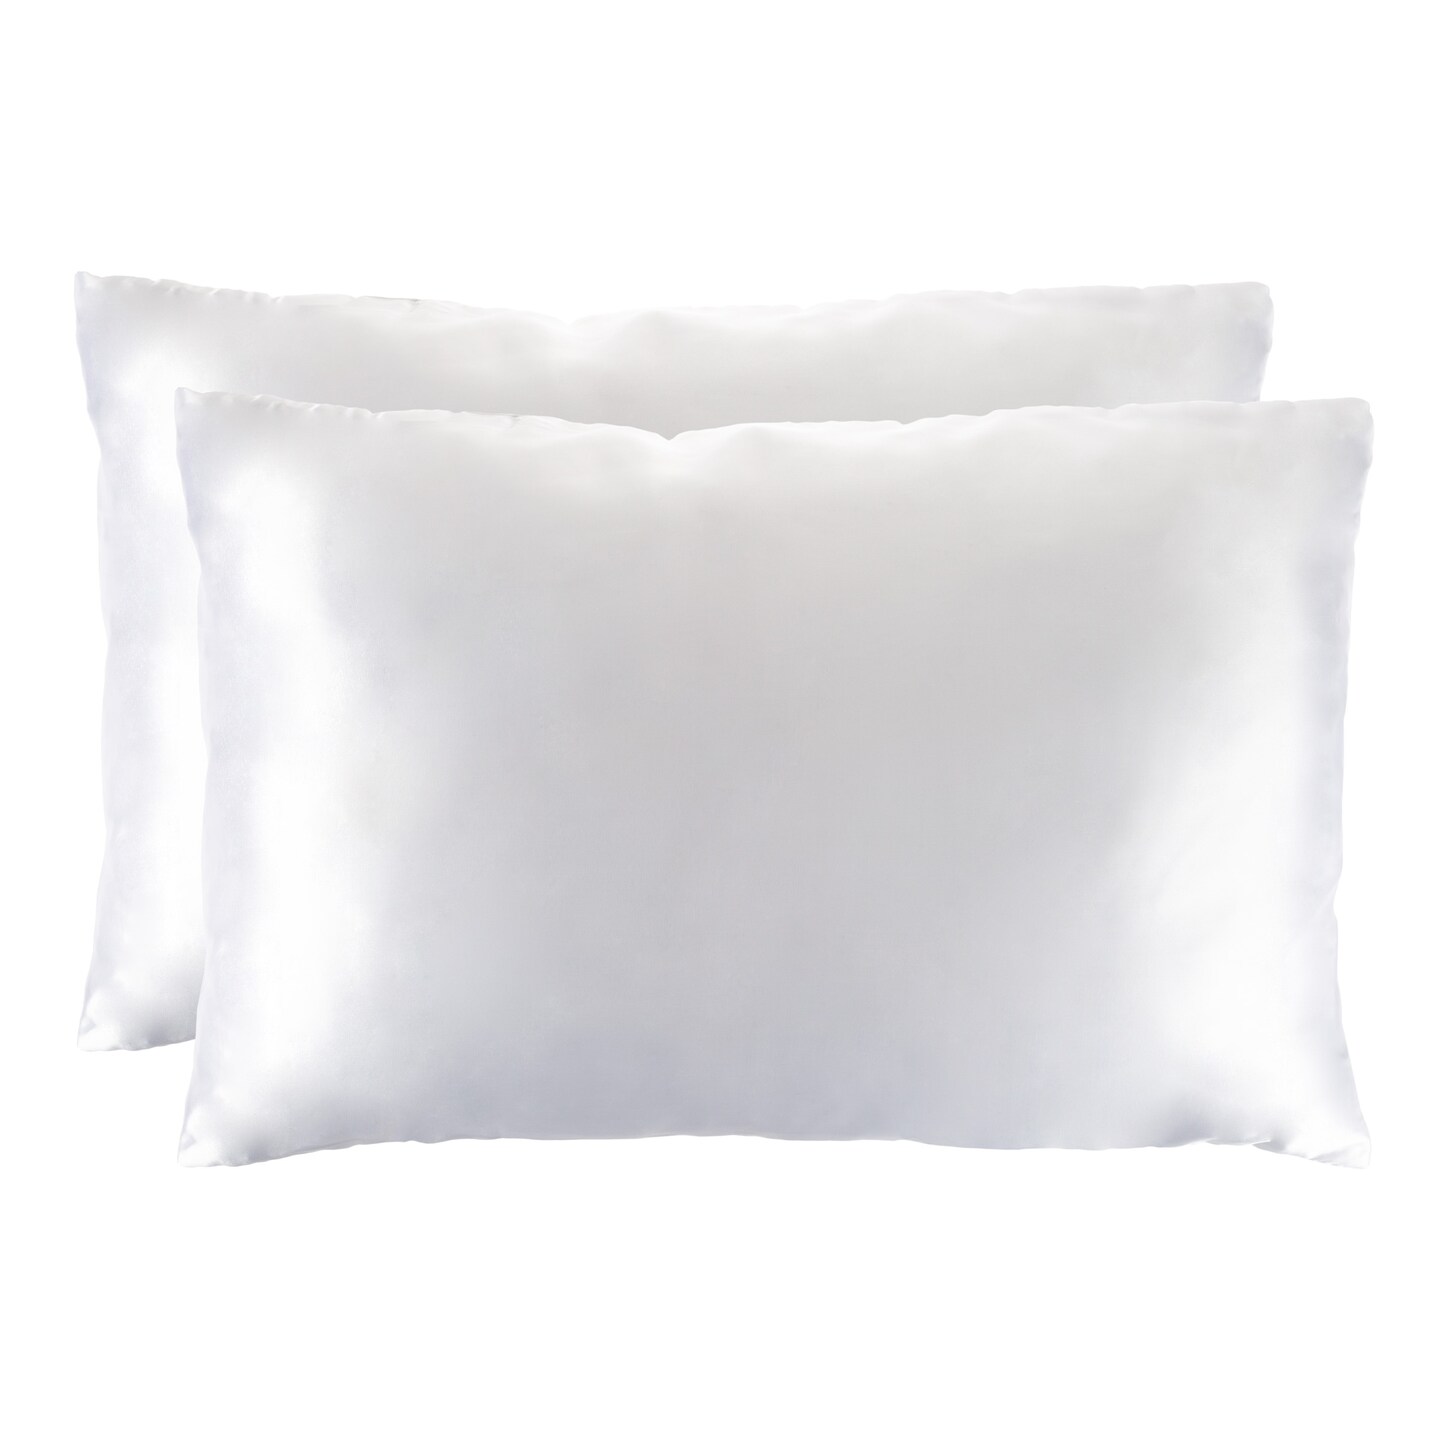 Lavish Home Set of 2 Soft and Silky Satin Microfiber Pillowcases Hair and Skin Pillow Covers Hidden Zippers